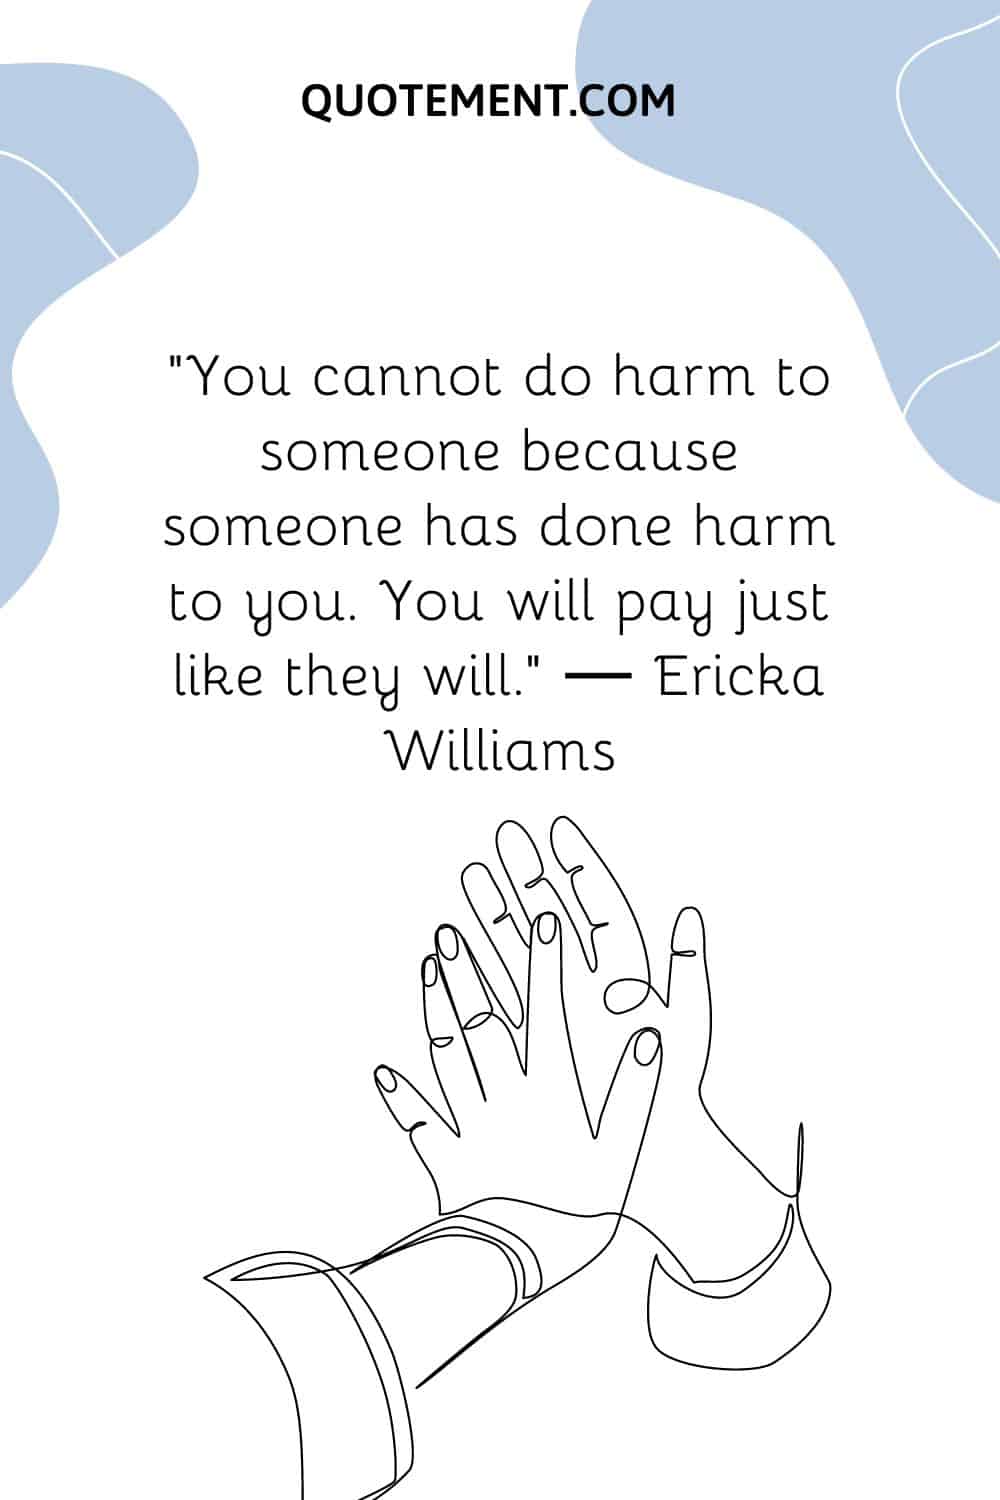 You cannot do harm to someone because someone has done harm to you. You will pay just like they will